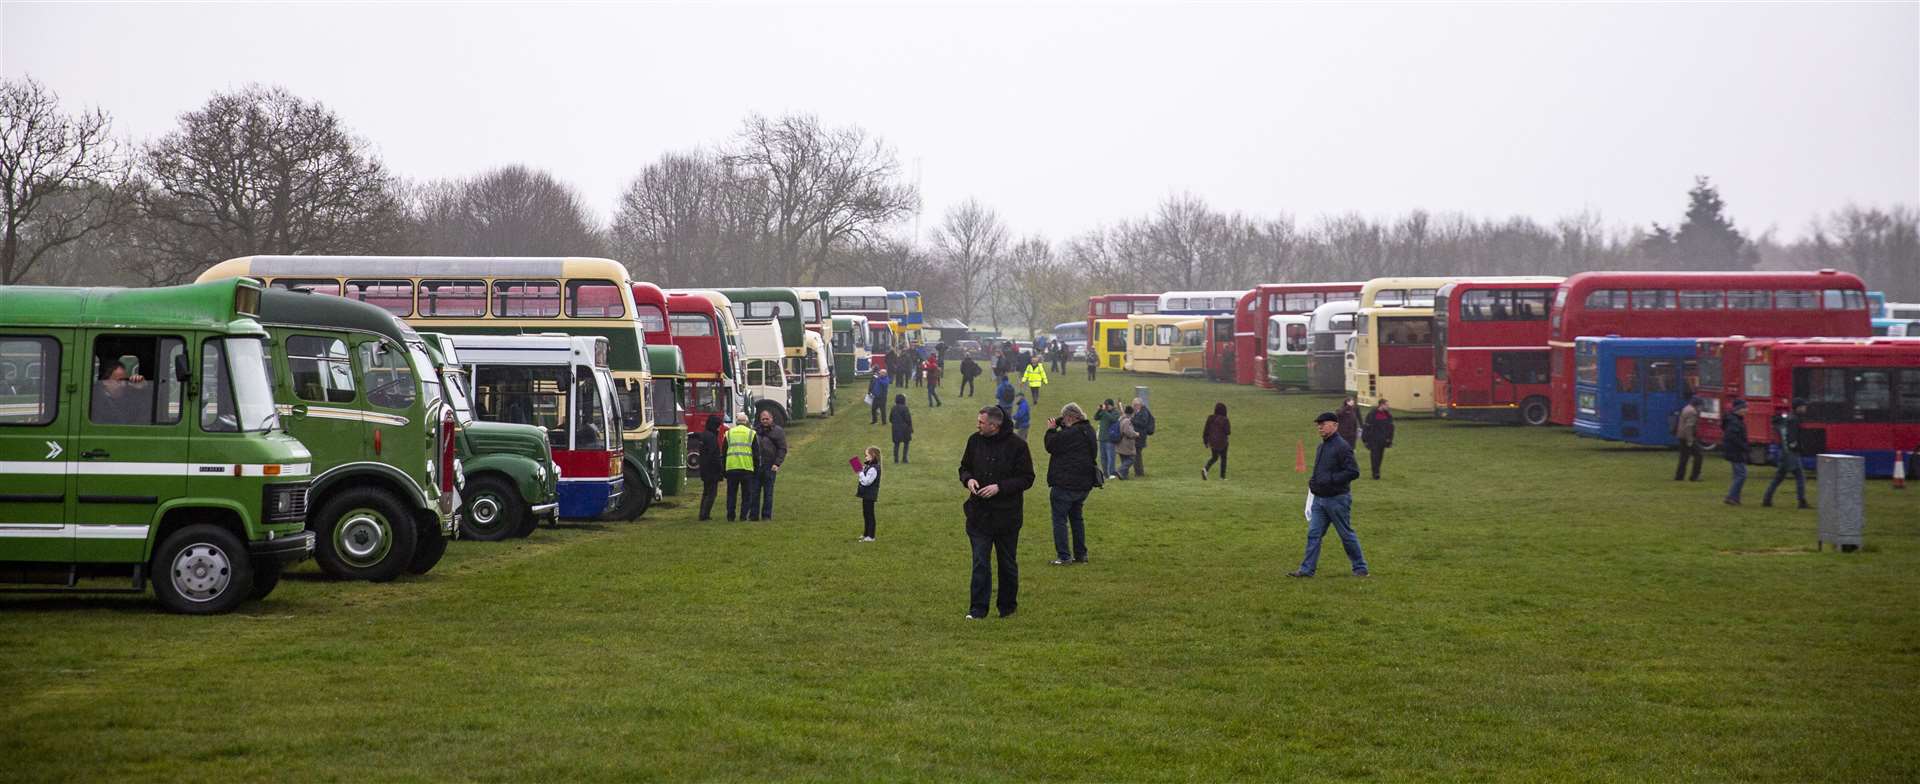 The South East Bus Festival hopes to join for the tenth year running. Picture: Kent County Agricultural Society